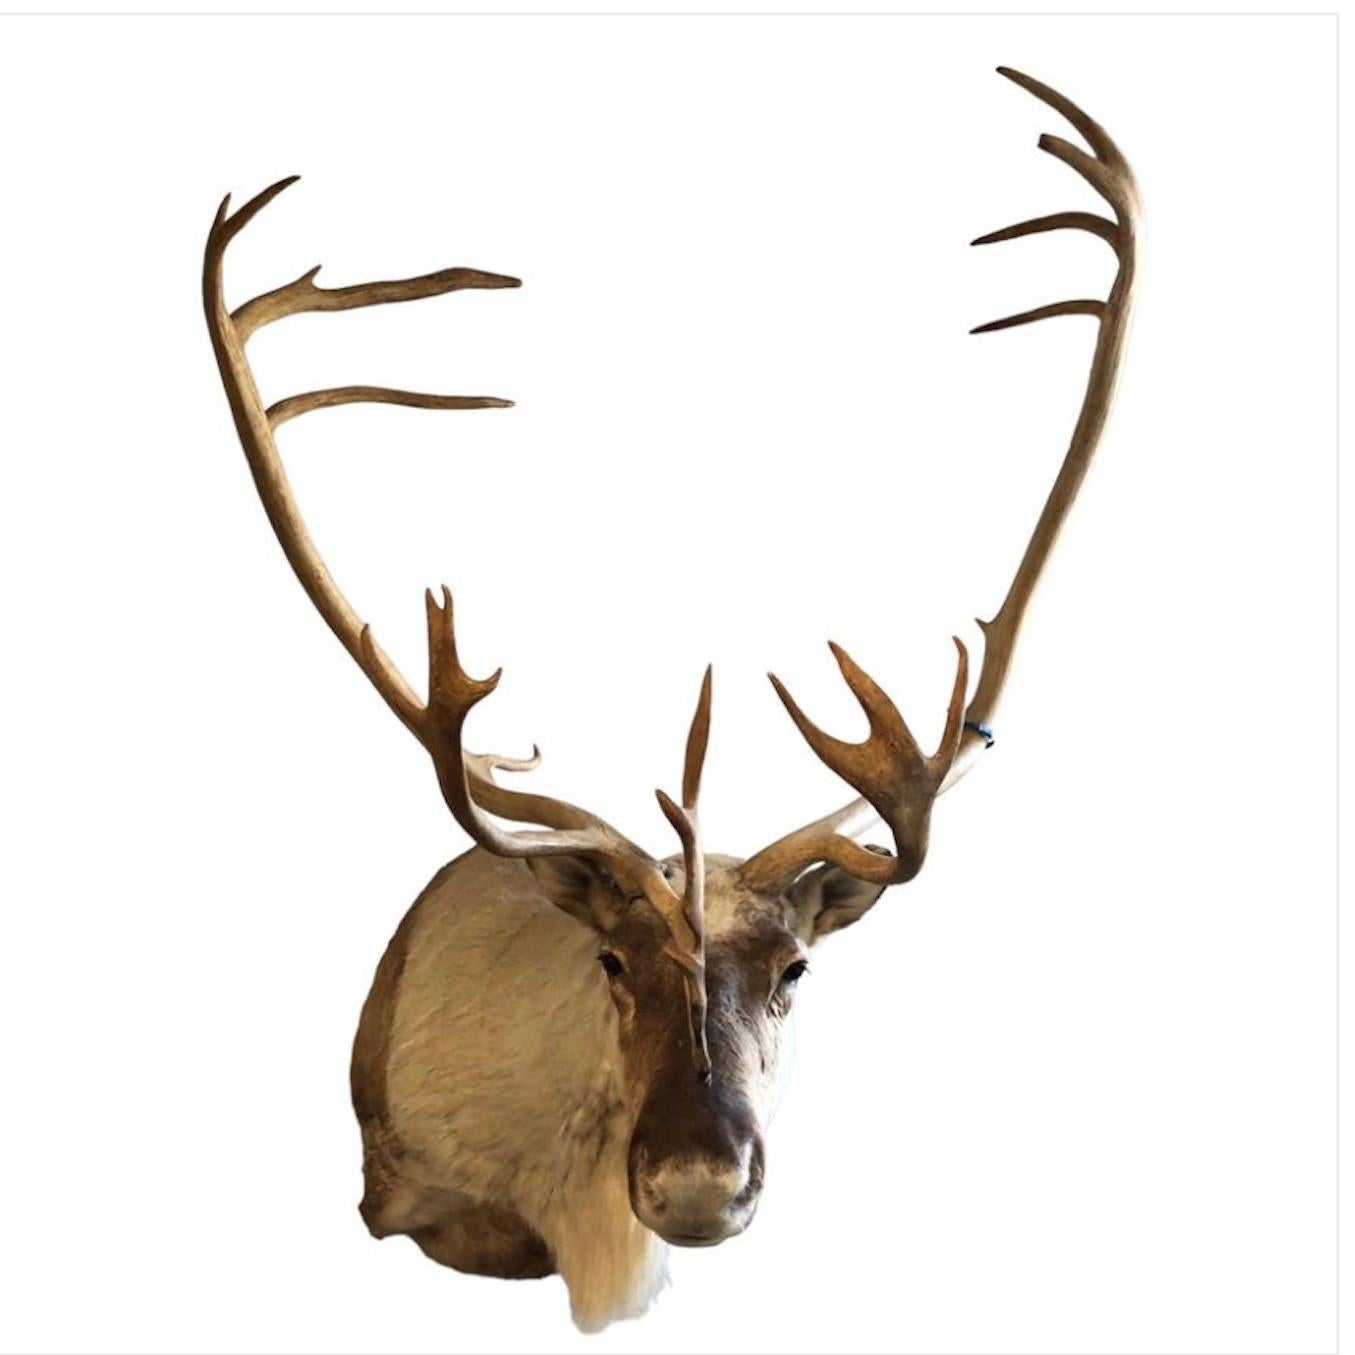 Fur Stately Taxidermy Reindeer Mount. For Sale